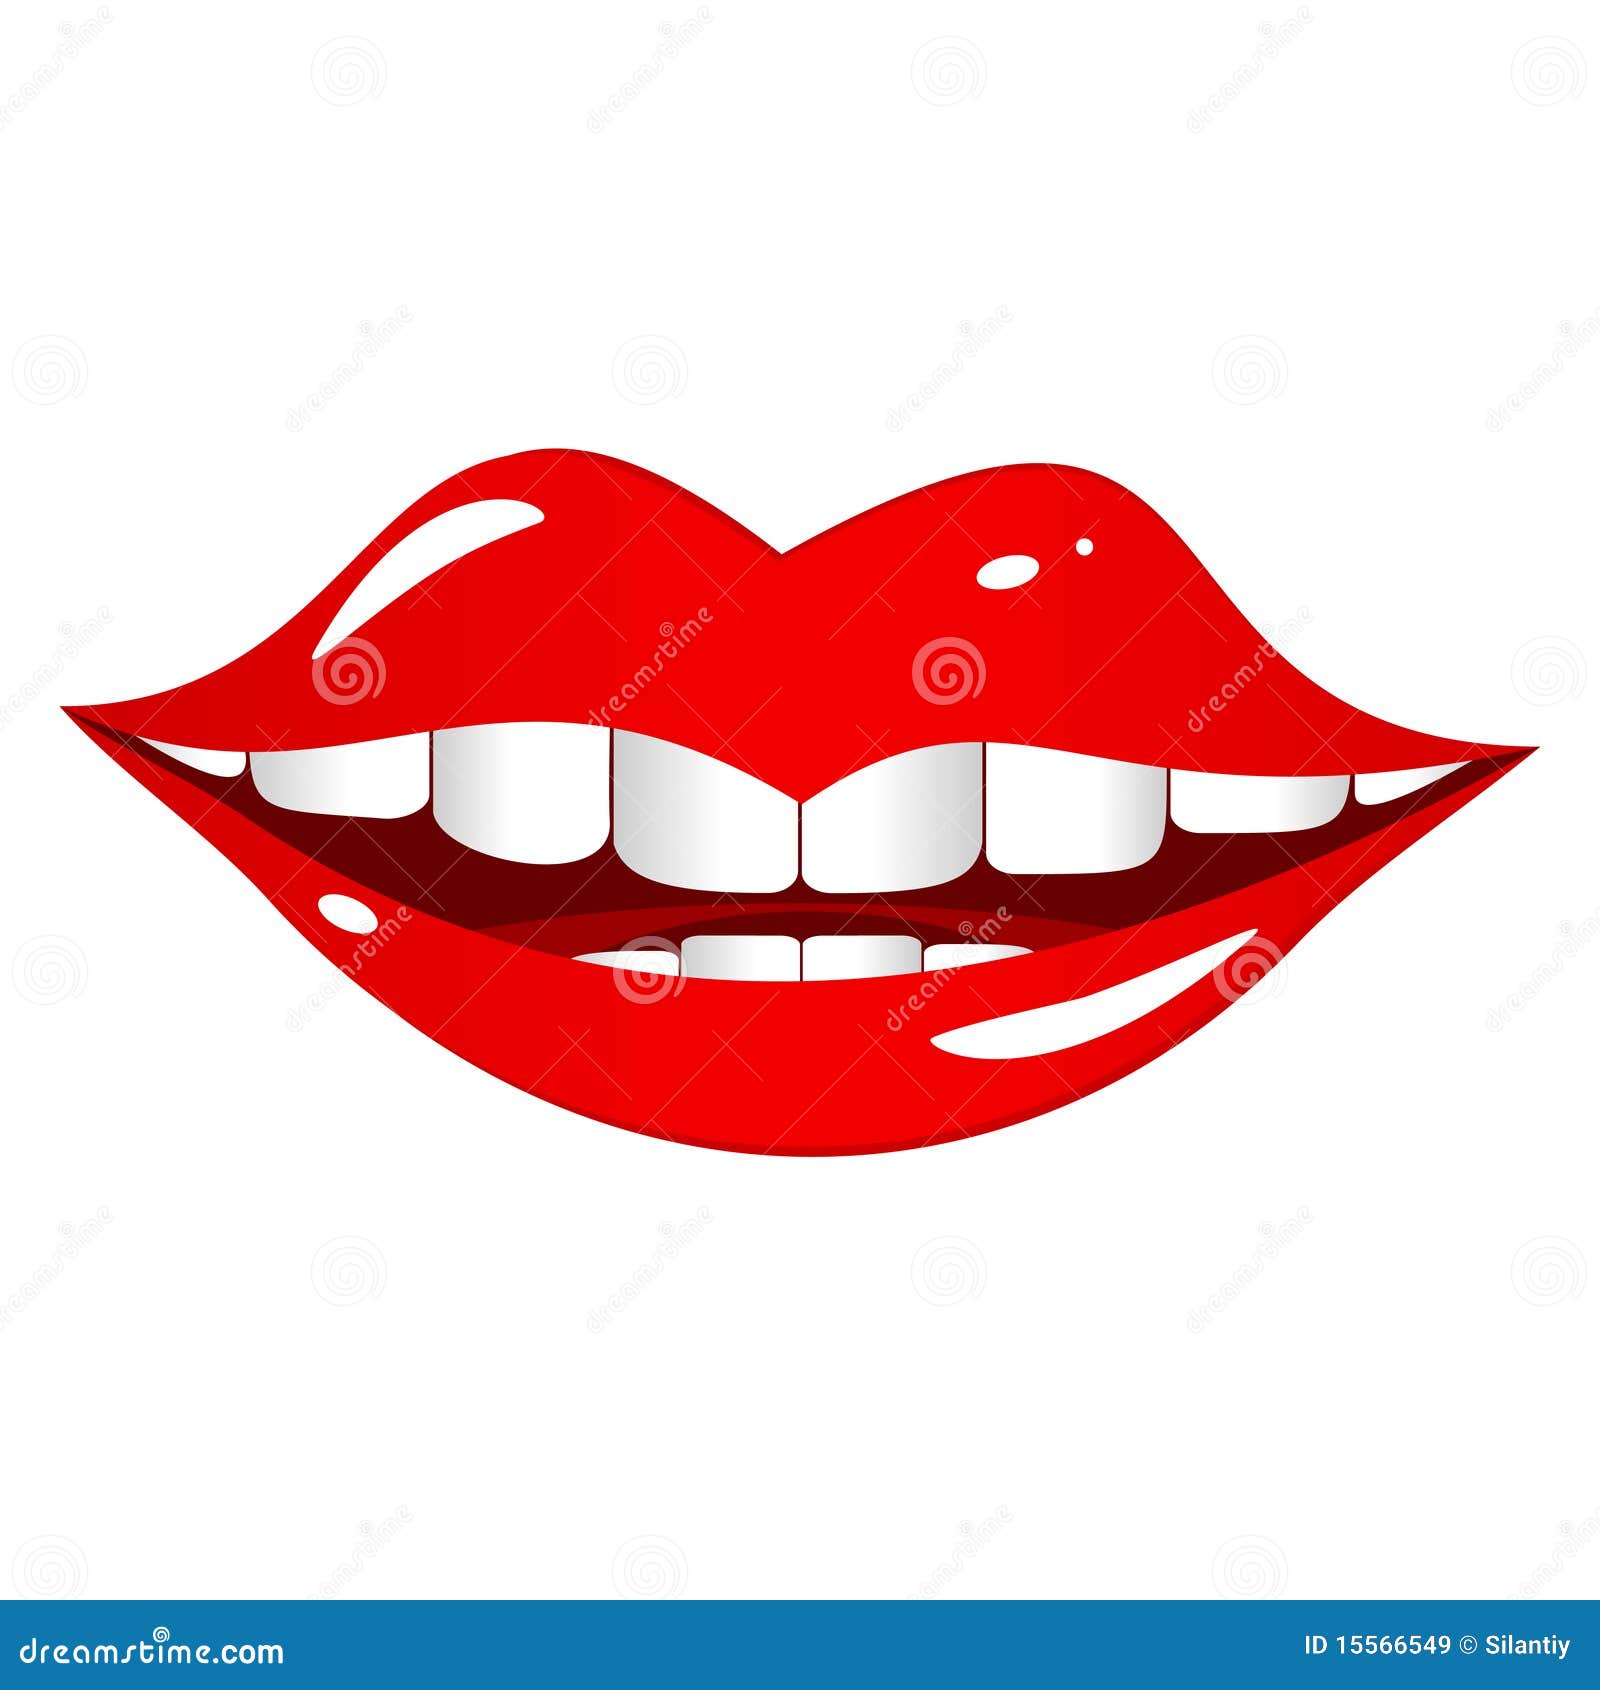 clipart of teeth and lips - photo #19